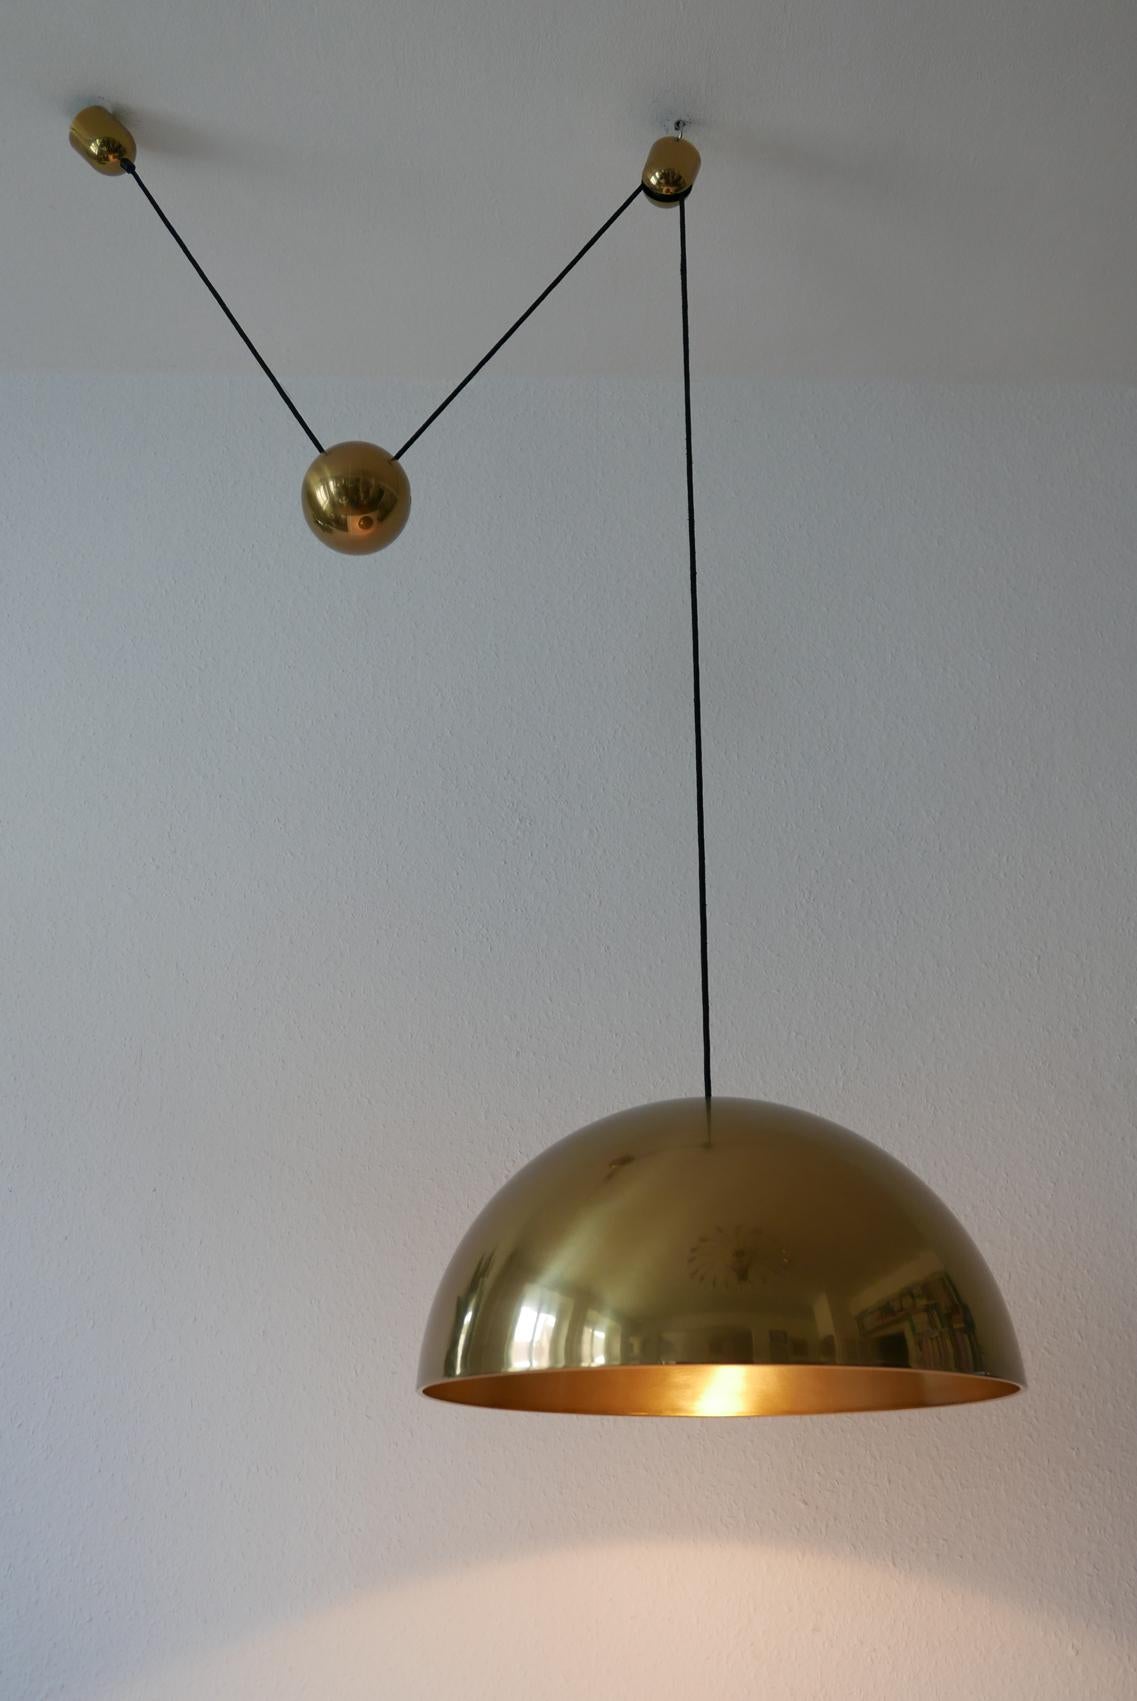 Exceptional Solan Counter Balance Pendant Lamp by Florian Schulz, 1980s, Germany For Sale 2